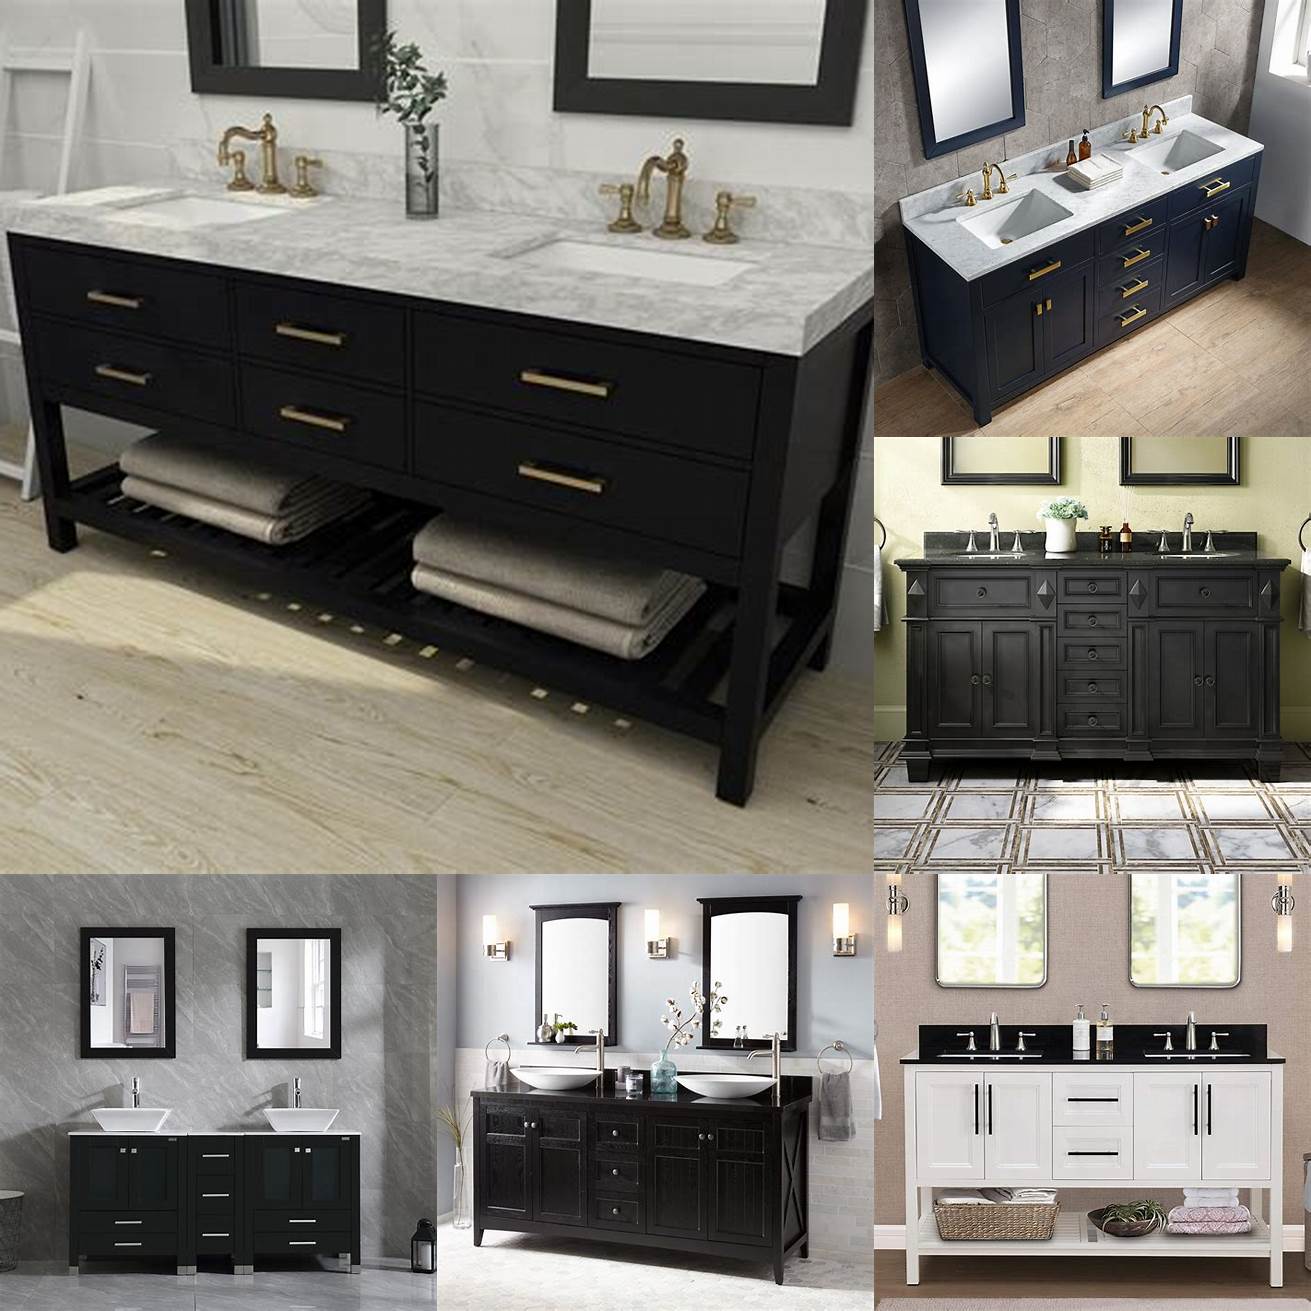 A sleek black double sink vanity with a marble top